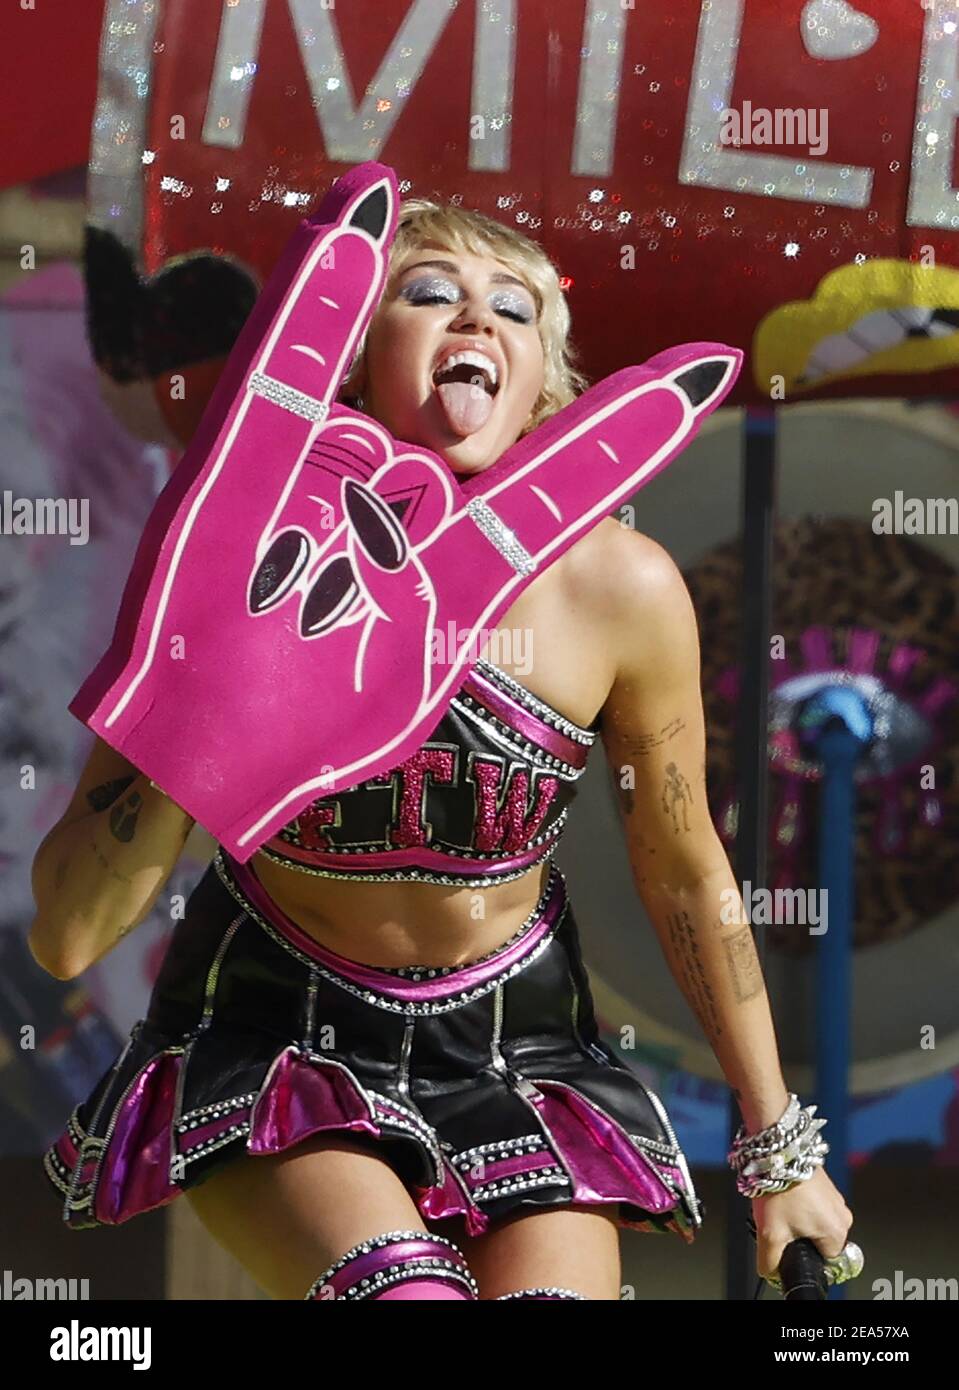 Tampa, United States. 07th Feb, 2021. Recording artist Miley Cyrus performs during the Tic Tok Tailgate party prior to Super Bowl LV at Raymond James Stadium in Tampa, Fla. on Sunday, February 7, 2021. Photo by John Angelillo/UPI Credit: UPI/Alamy Live News Stock Photo